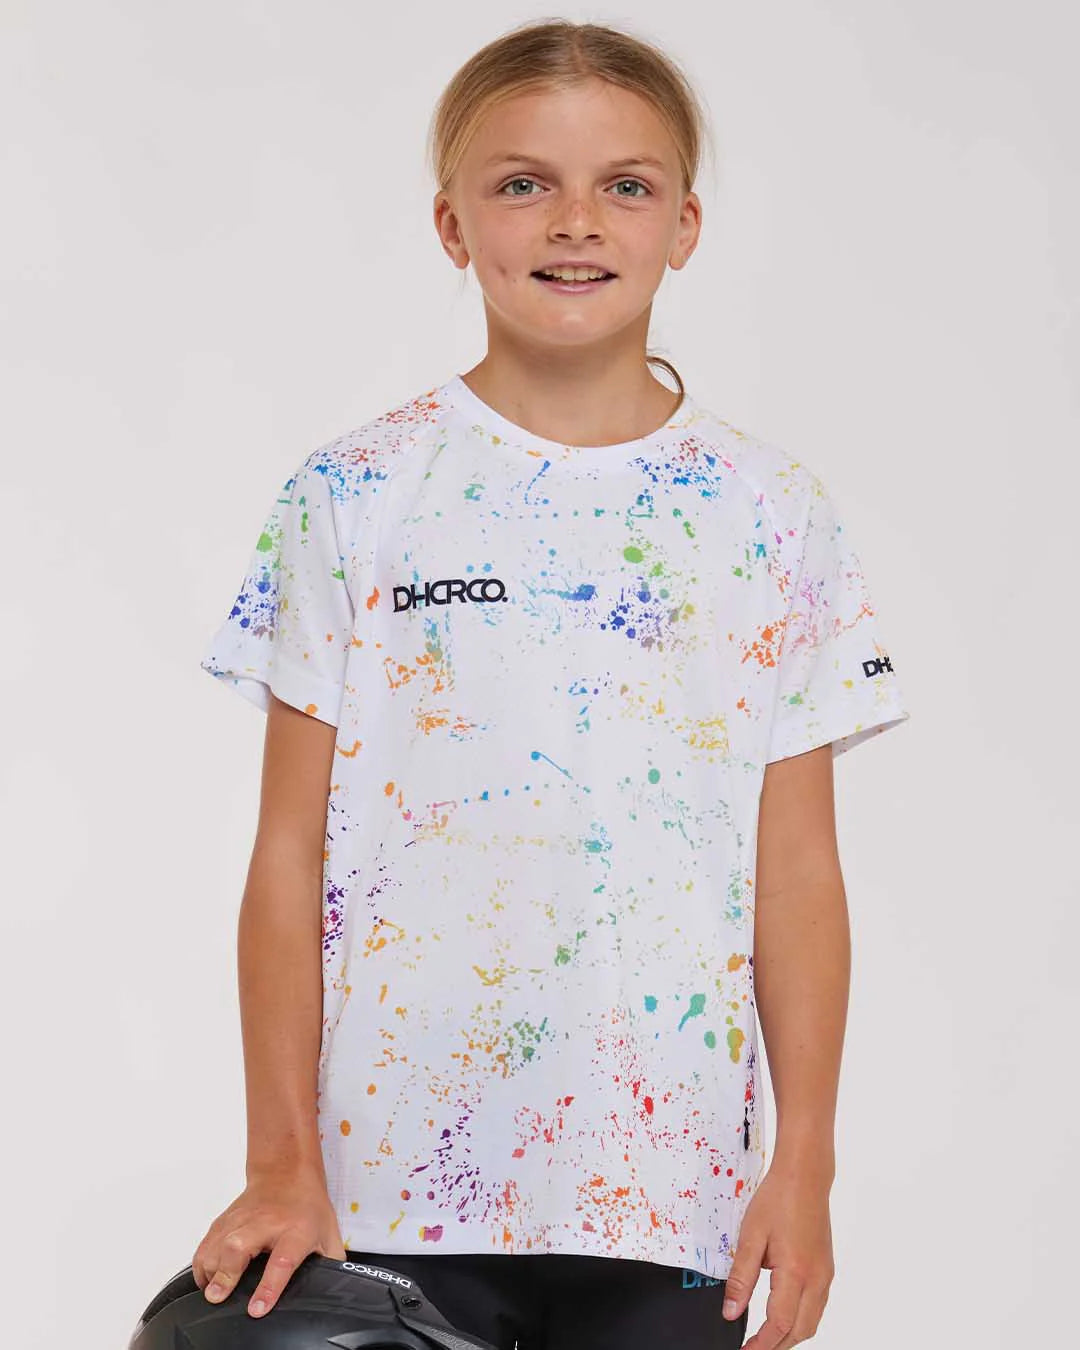 Dharco Youth Short Sleeve Jersey